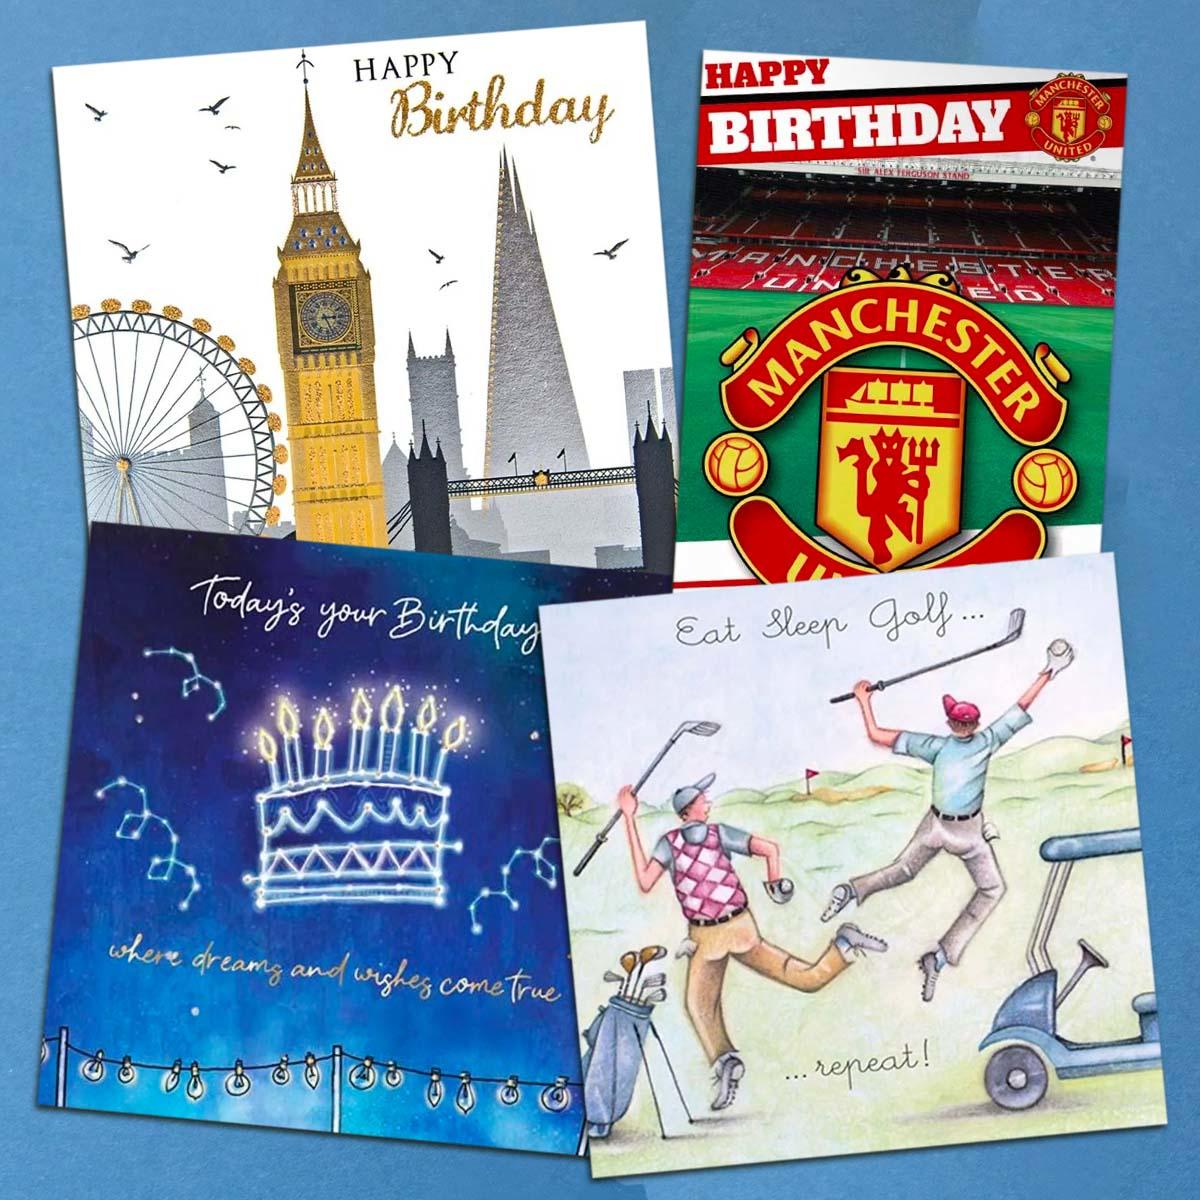 A Selection Of Cards To Show The Depth Of Range In Our Male Birthday Cards Section